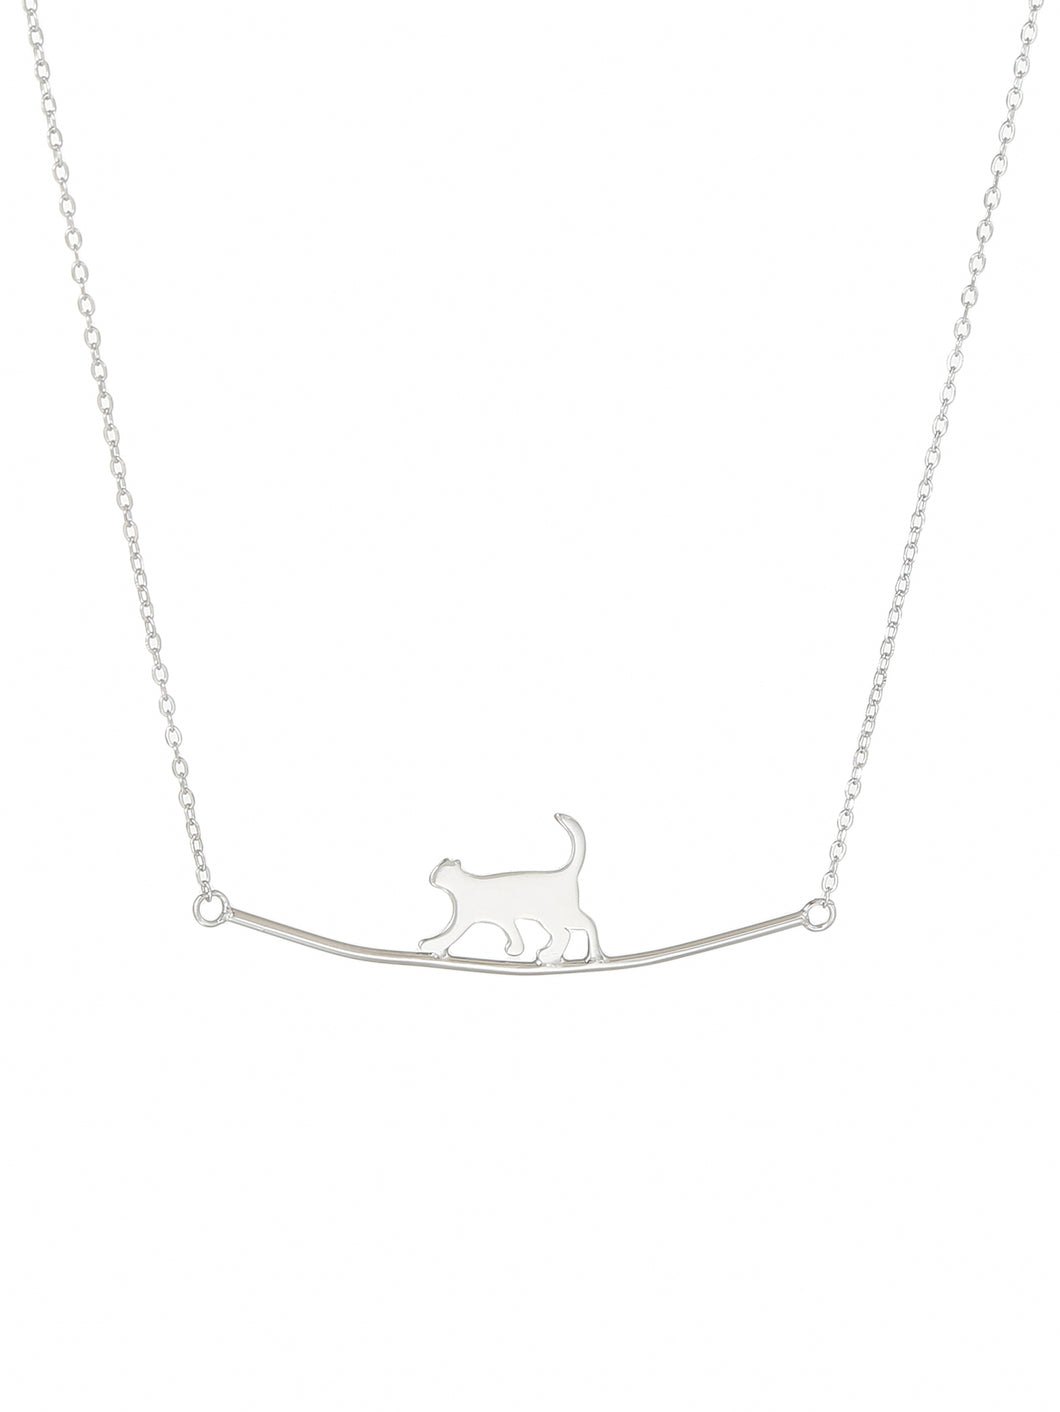 Cartoon Cat Silver Charm Necklace